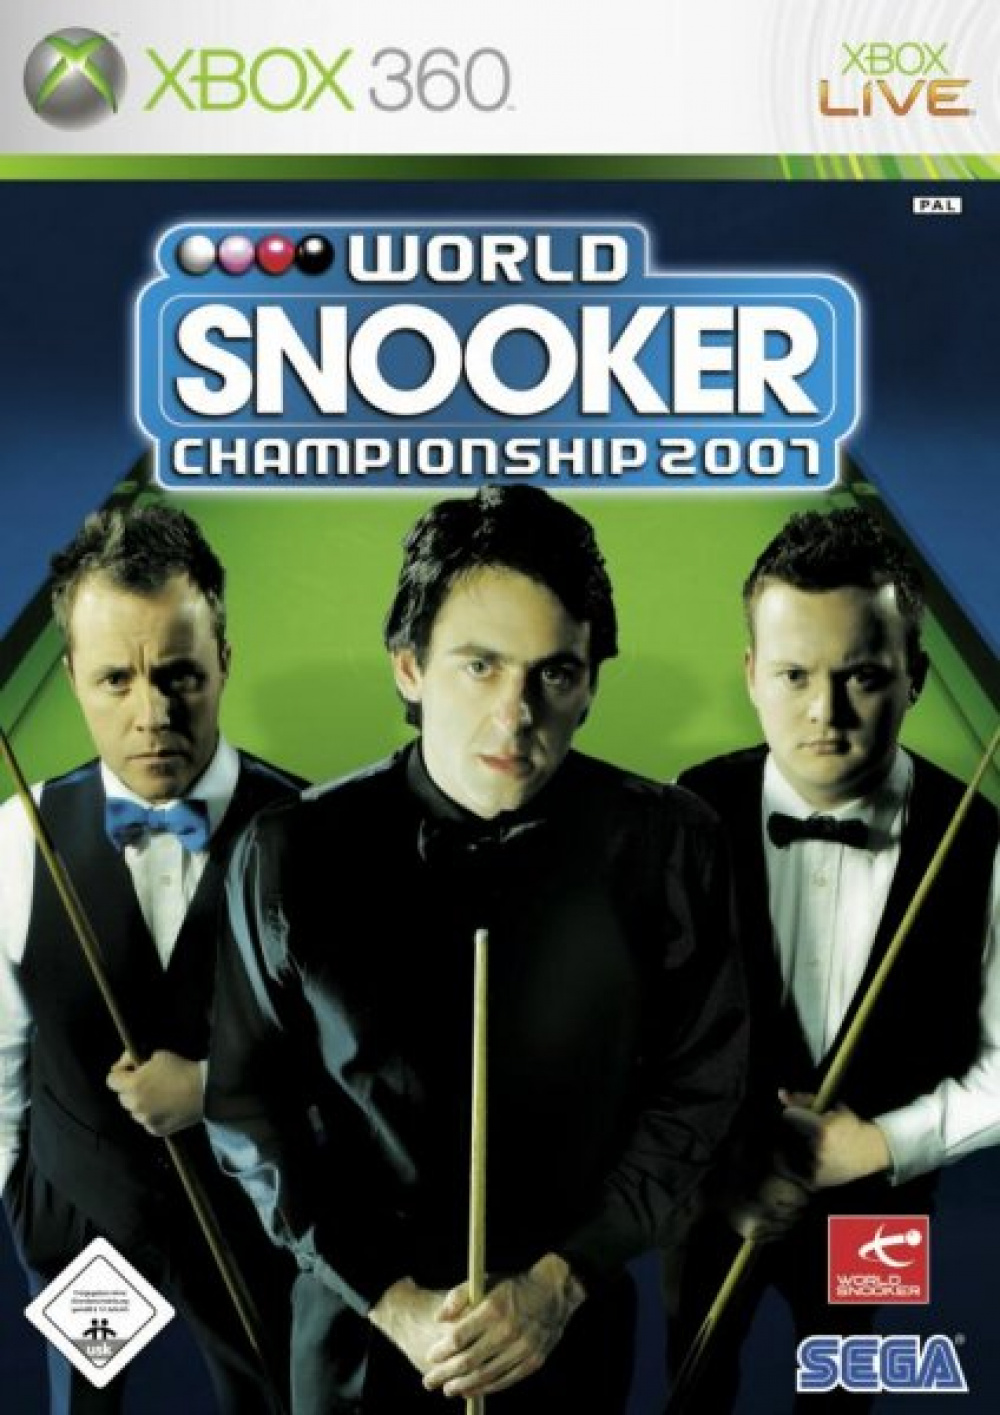 World Snooker Championship 2007 (Xbox 360, PSP und PS2) Video Game Reviews and Previews PC, PS4, Xbox One and mobile